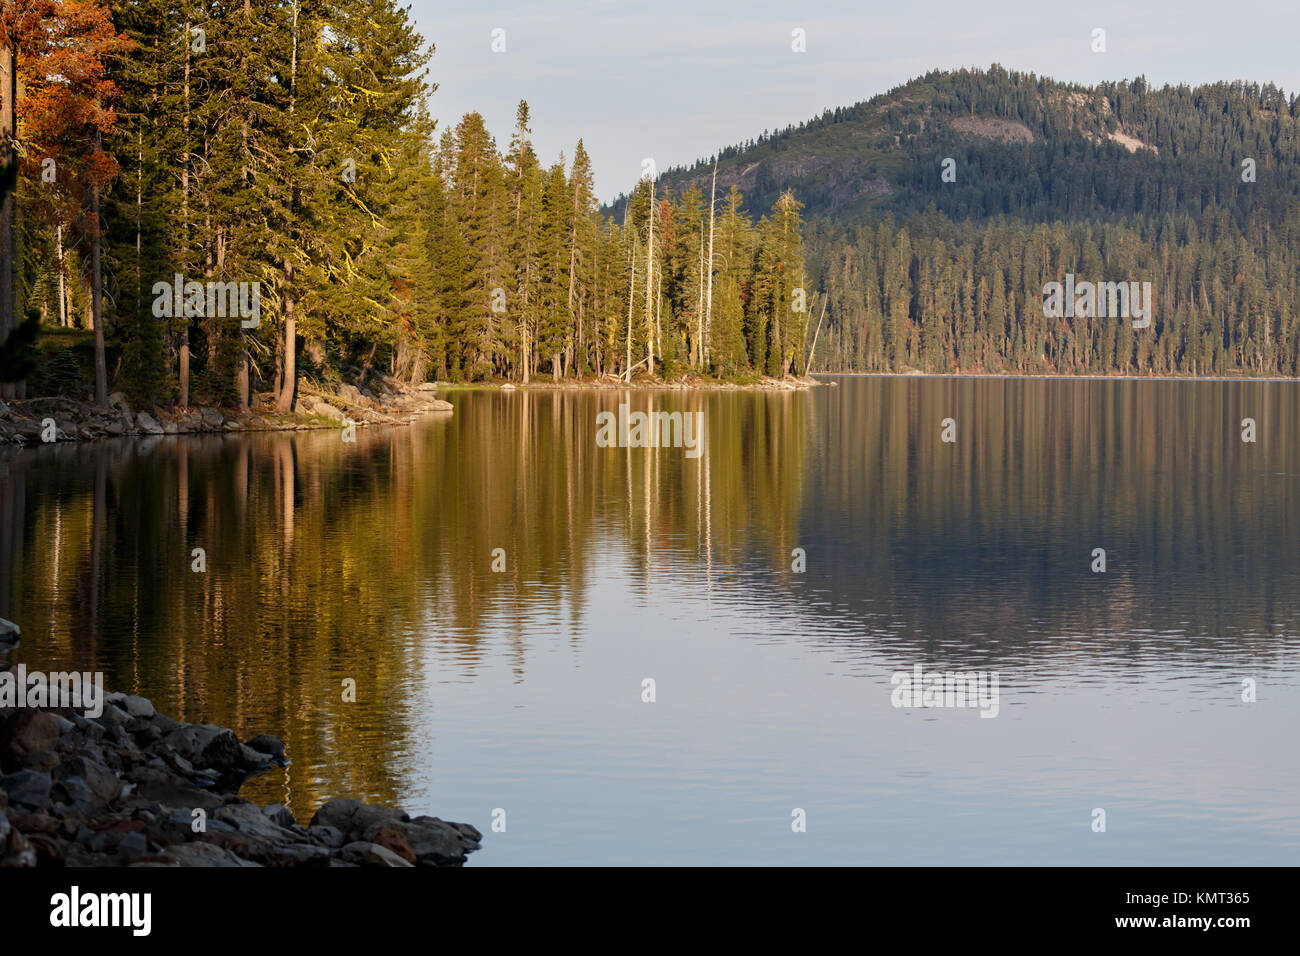 Placid shoreline of alpine lake with reflections of forest and mountains Stock Photo